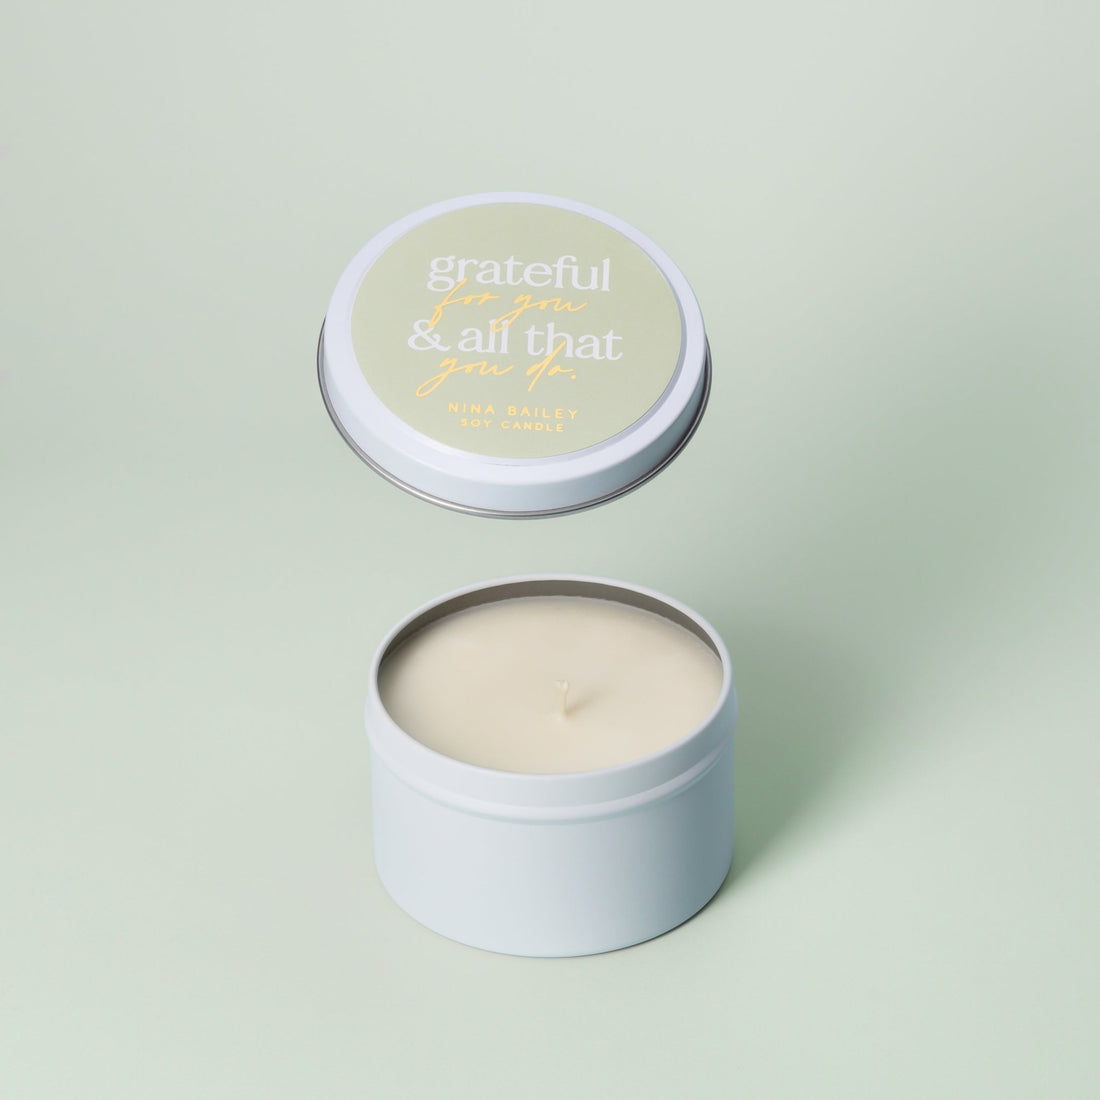 Grateful for you - Occasion Candle - Nina Bailey